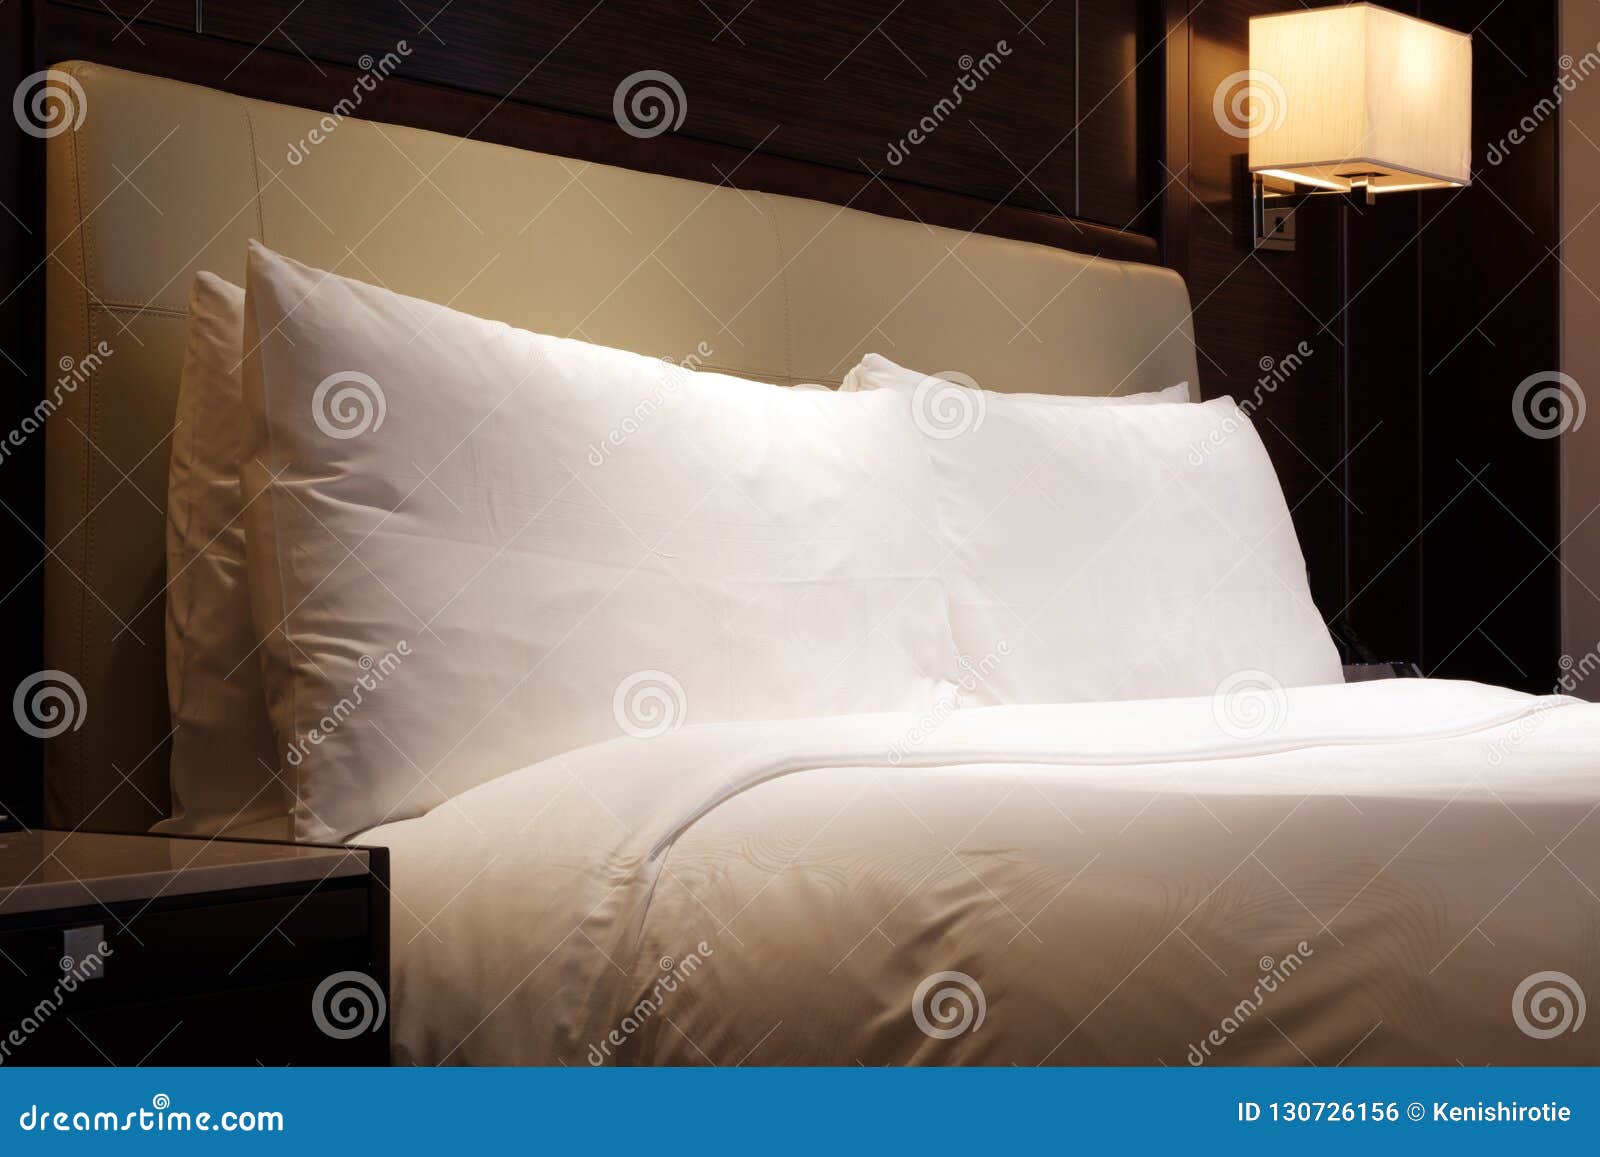 Standard King Size Beds Hotel Room Stock Photo Image Of Room